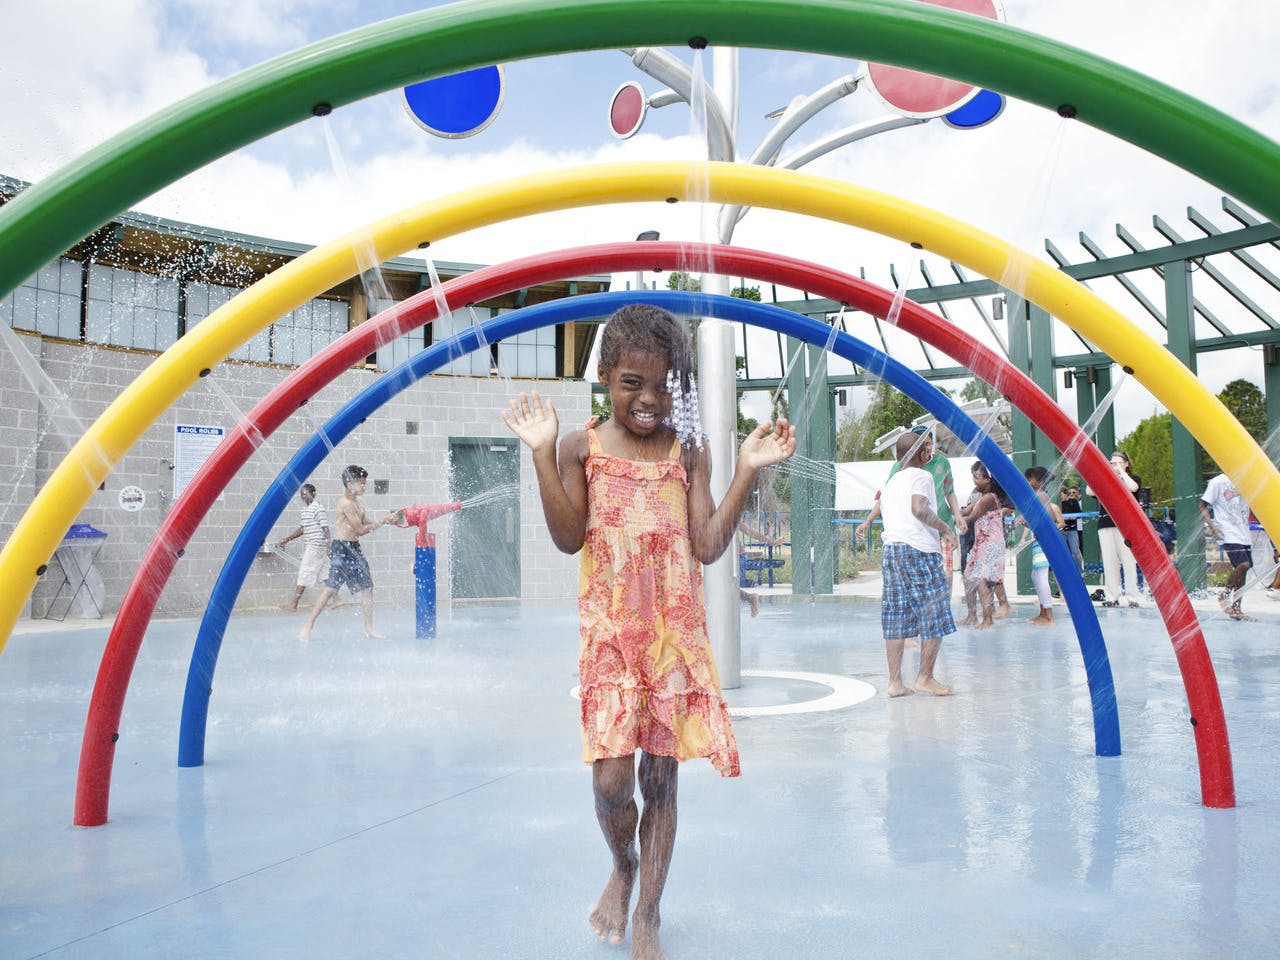 A girl laughs while being sprayed by water on a splash pad.